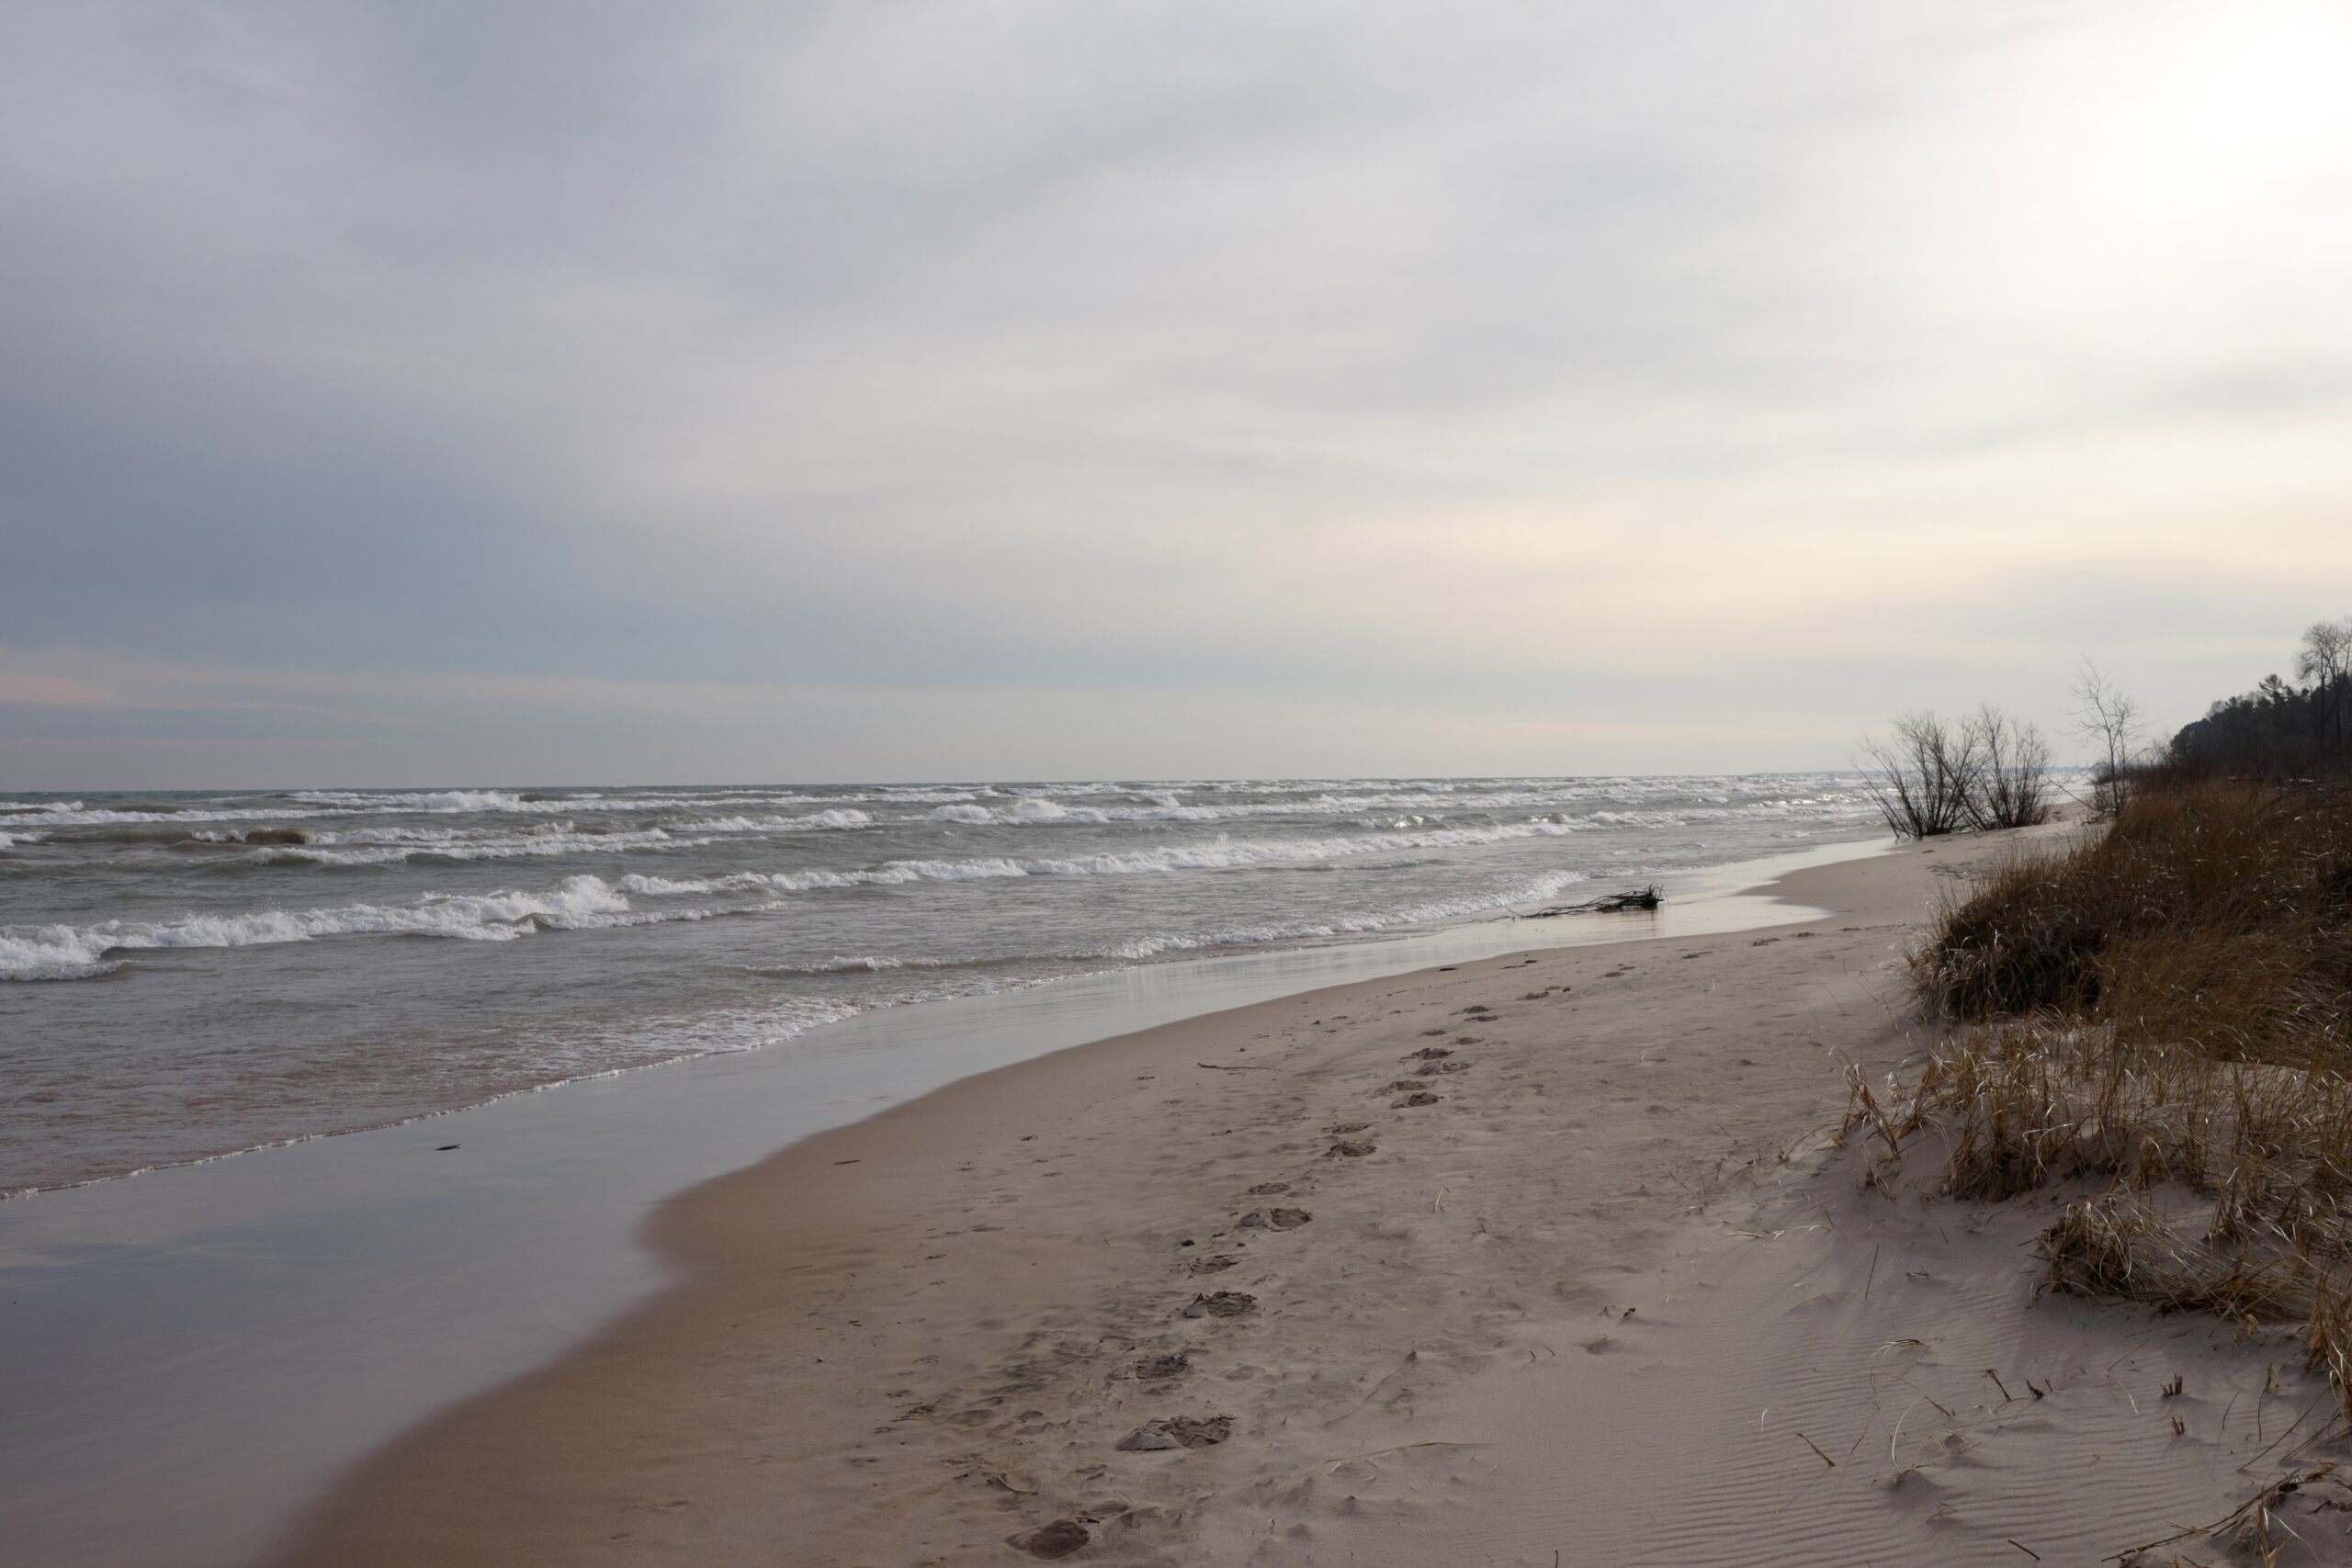 A picture of the sandy beach along the shore of Lake Michigan with foot prints in the sand.